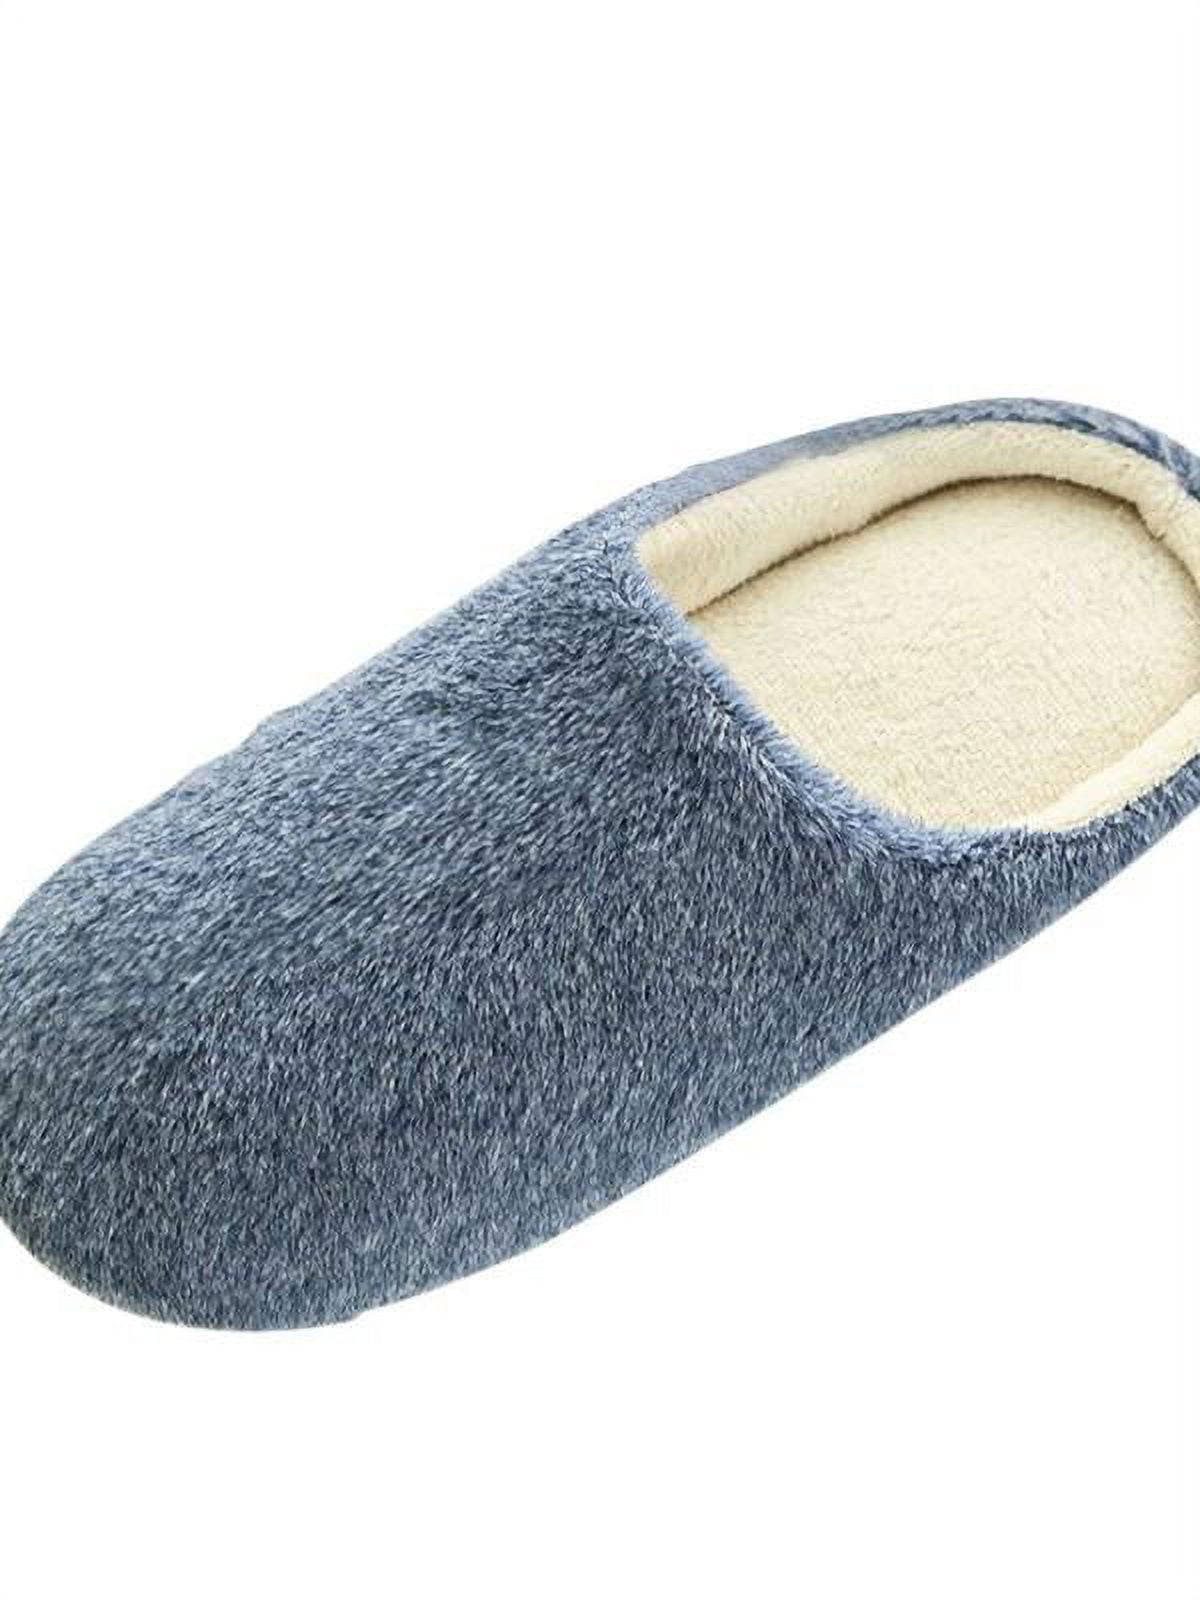 Plush Slippers, Woman Fluffy Warm Shoes, Winter Shoes for Women ...